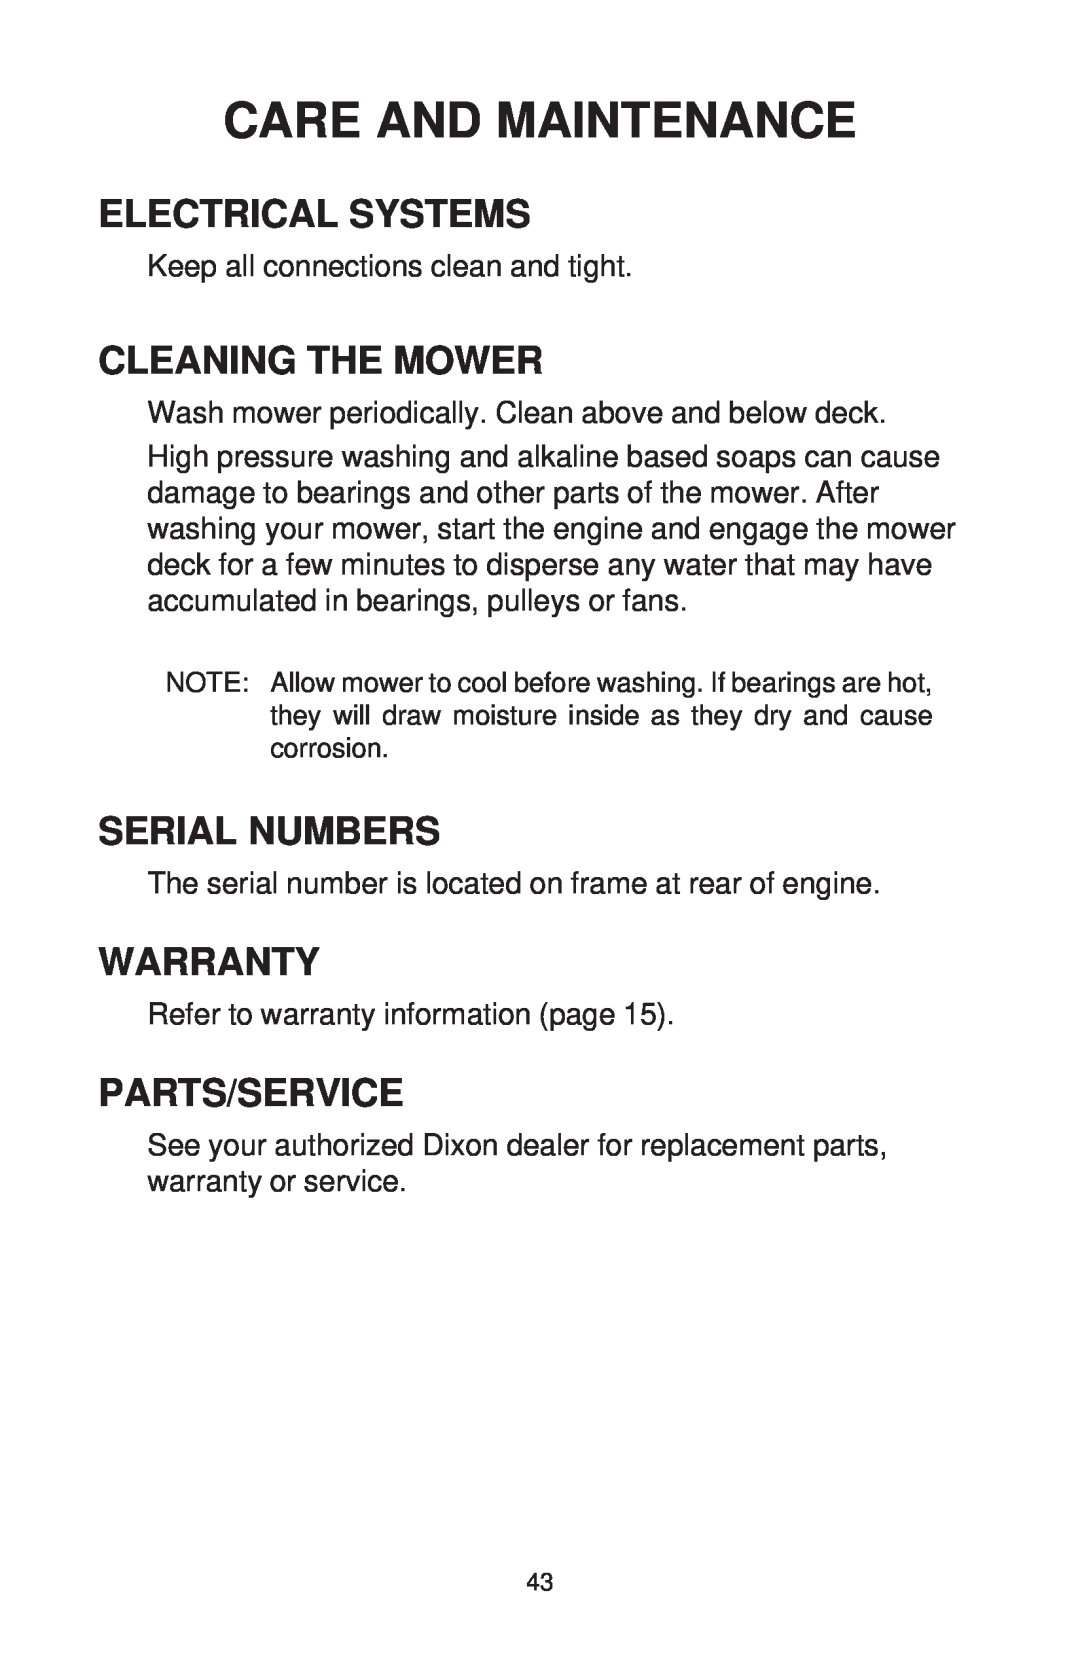 Dixon ZTR 44/968999538 manual Electrical Systems, Cleaning The Mower, Serial Numbers, Warranty, Parts/Service 